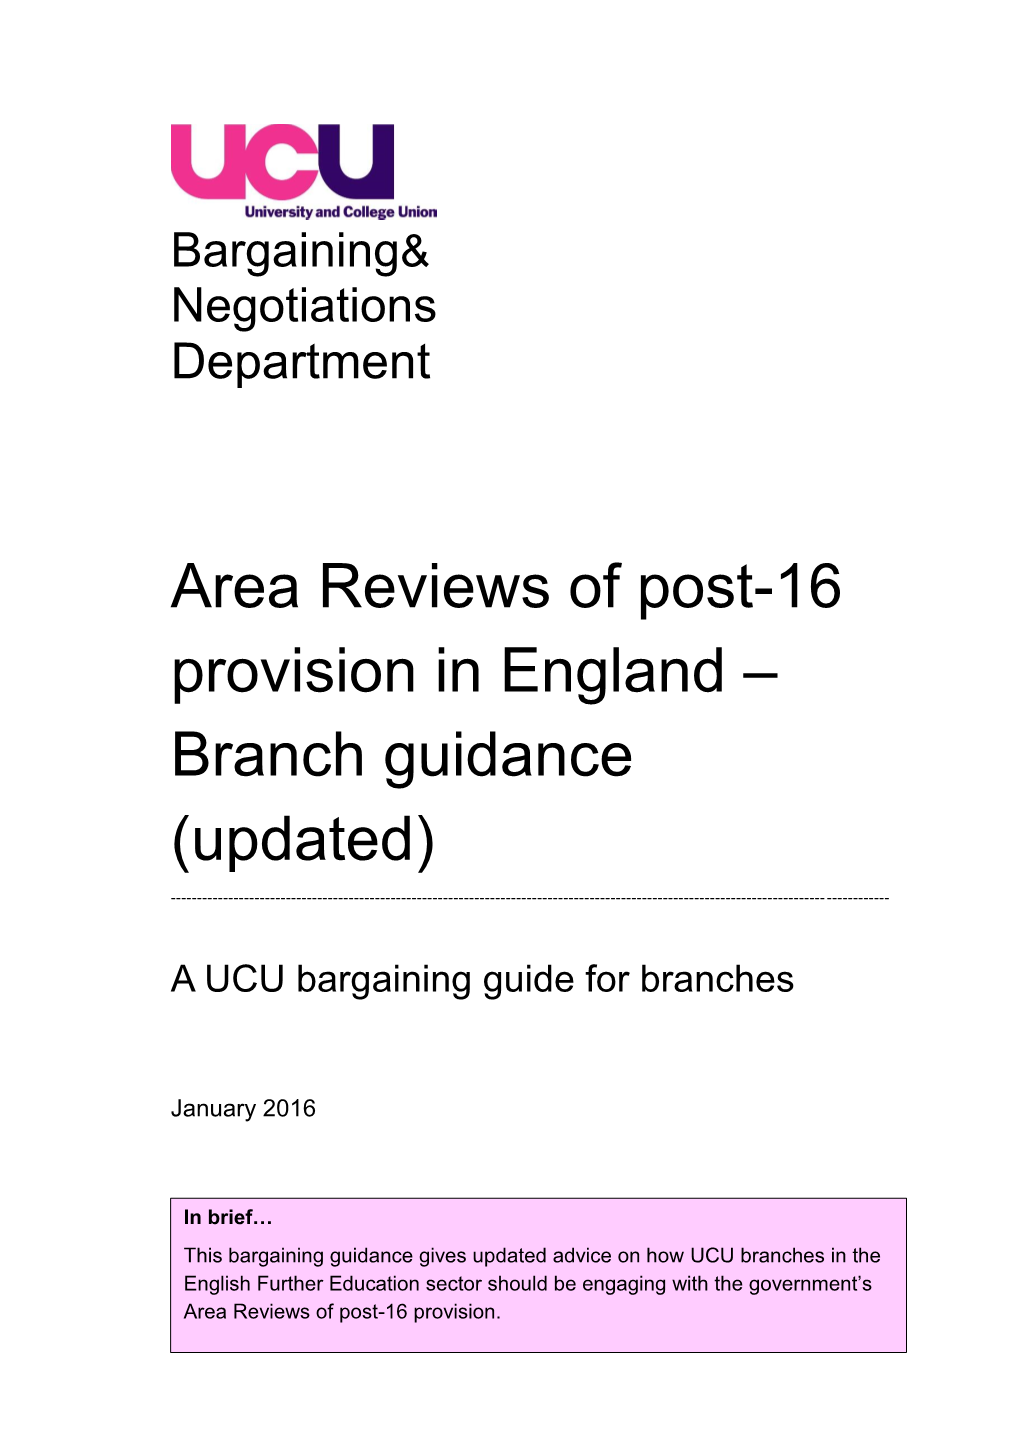 Area Reviews of Post-16 Provision in England – Branch Guidance (Updated)